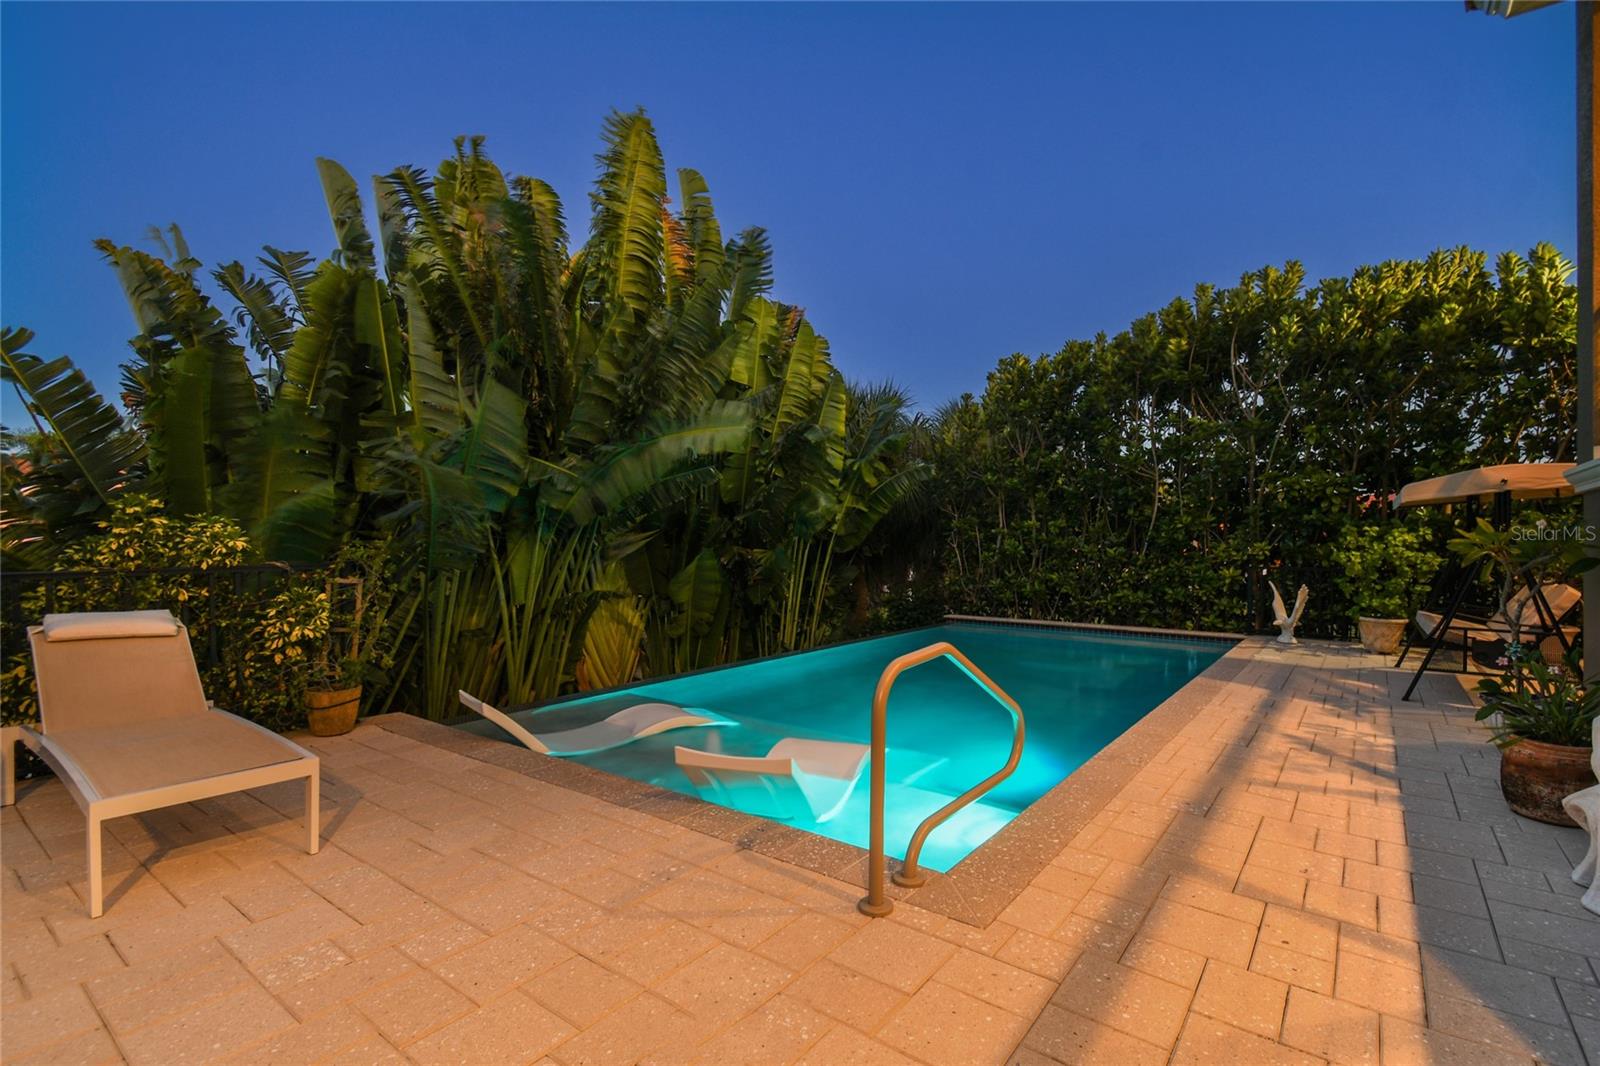 Heated infinity edge pool with total privacy